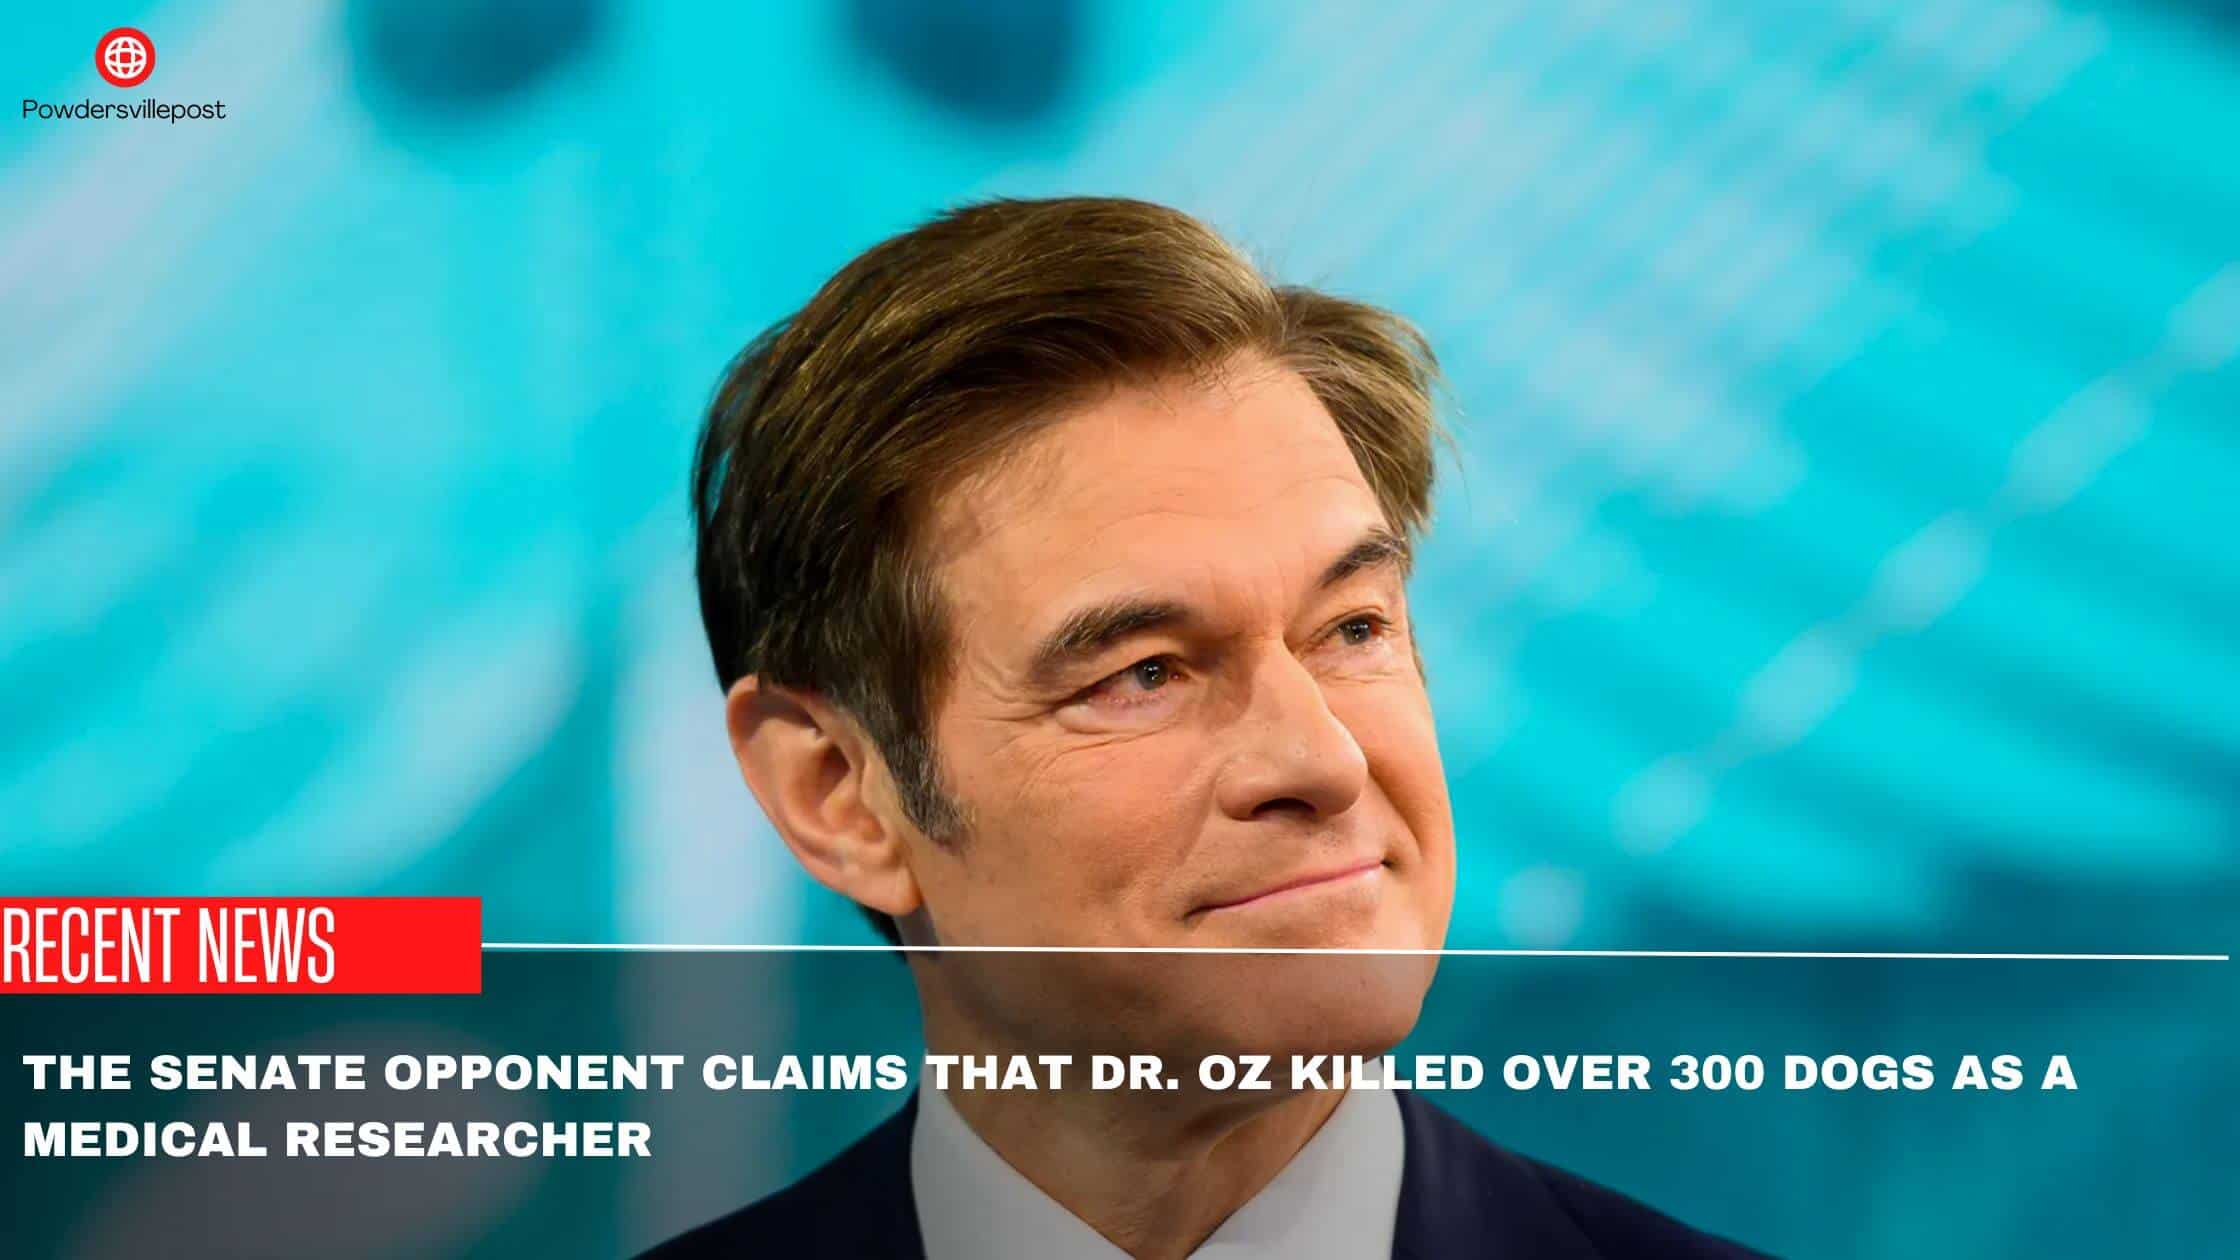 The Senate Opponent Claims That Dr. Oz Killed Over 300 Dogs As A Medical Researcher